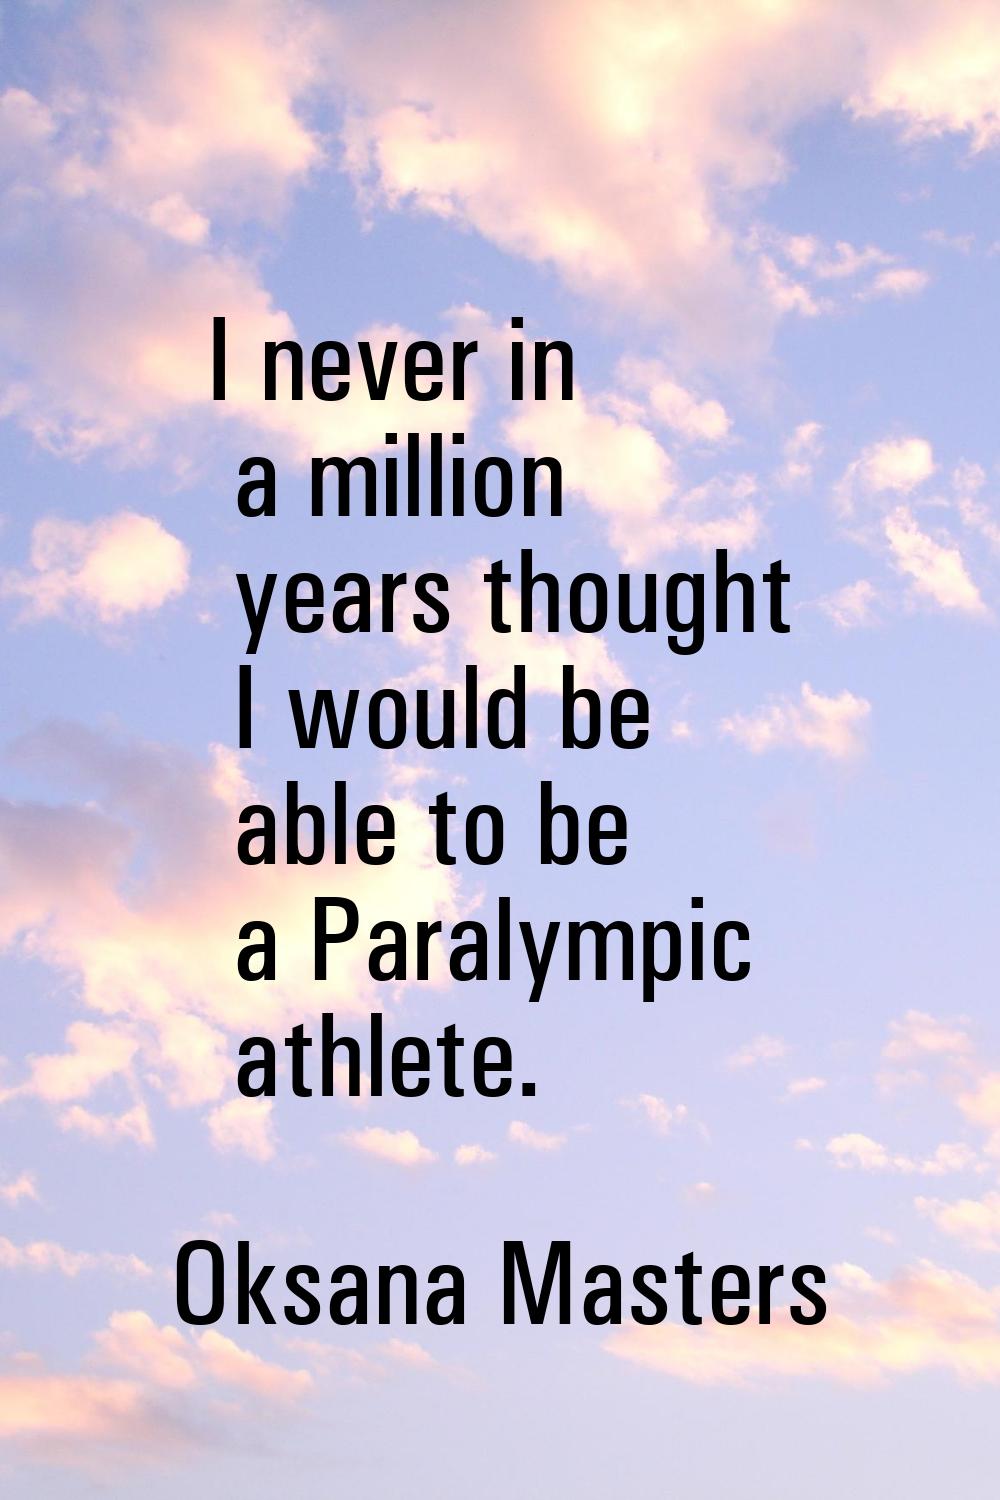 I never in a million years thought I would be able to be a Paralympic athlete.